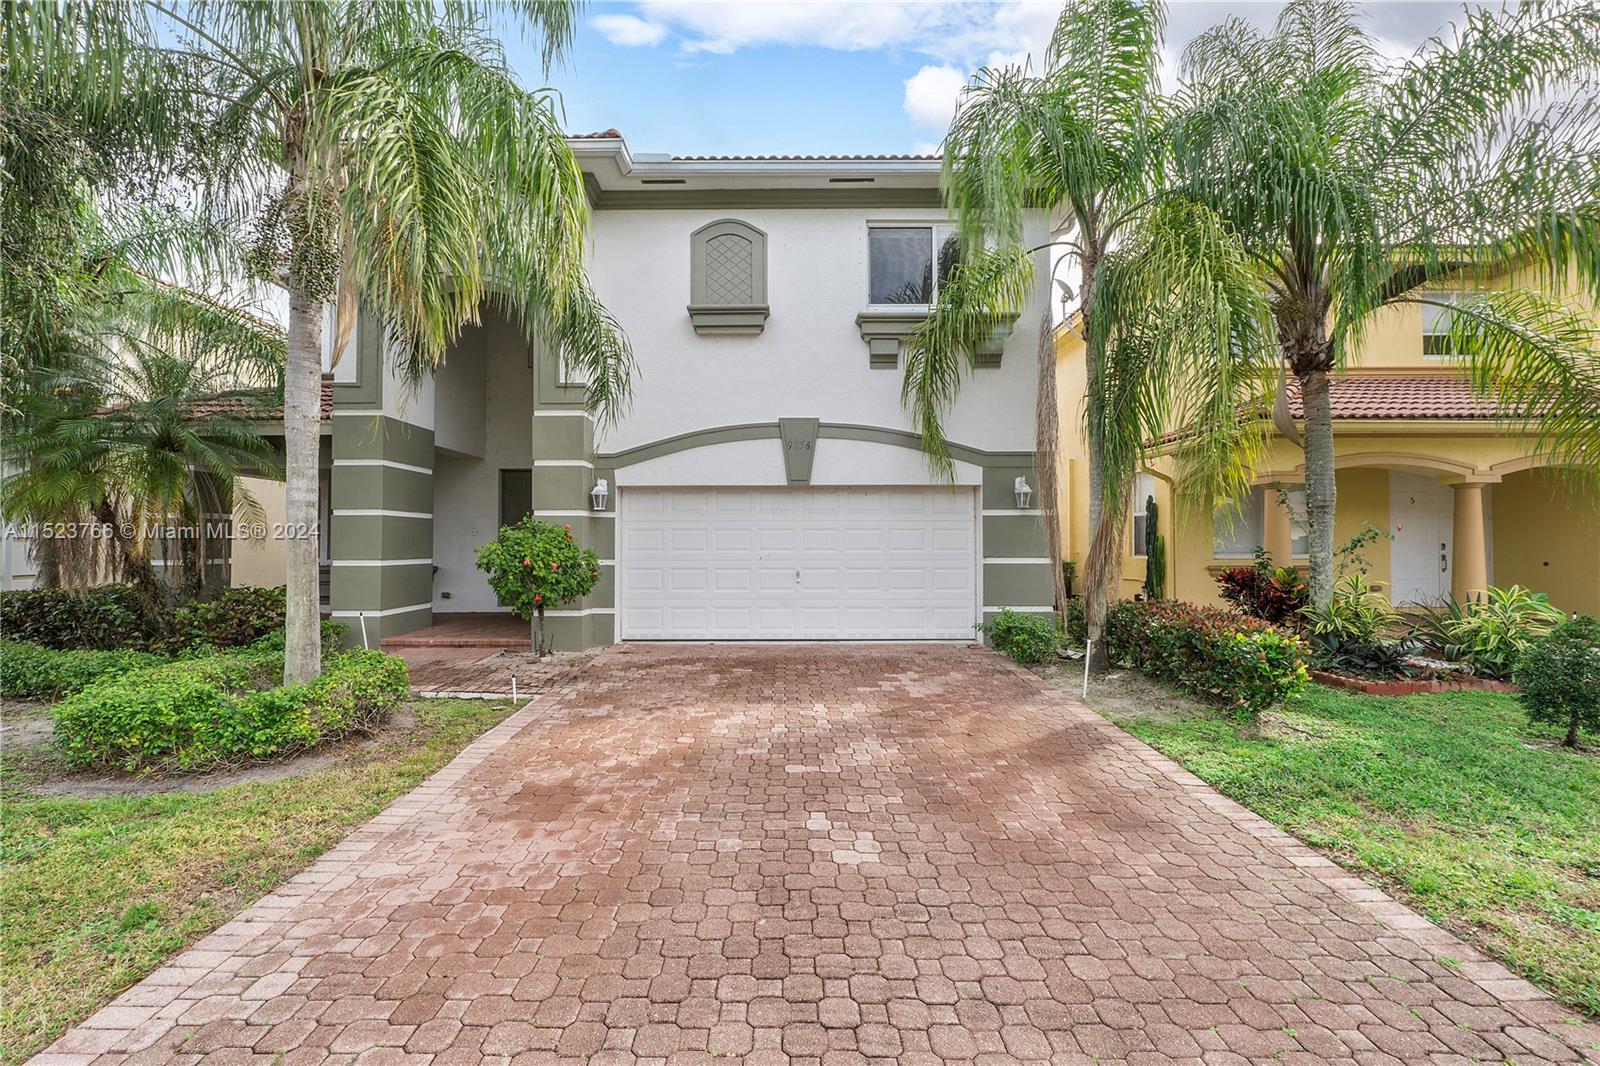 Come And See This Amazing 5 Bed 2.5 Bath + 2 Car Garage Home In The Heart Of Lake Worth! Enjoy Amazi